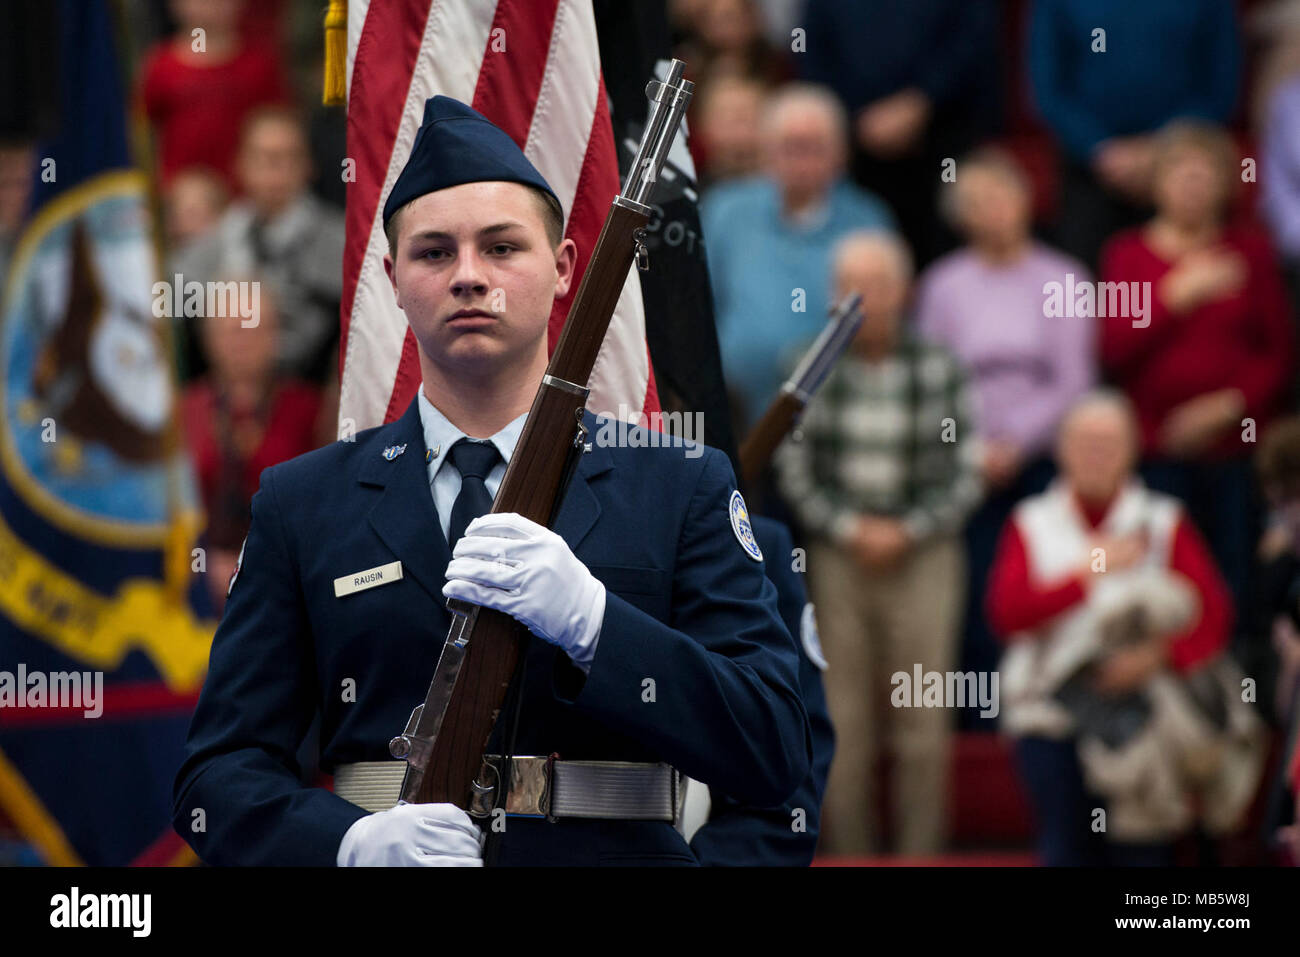 RANCHO CORDOVA, Calif. (Feb. 22, 2018) The Cordova High School Air Force Junior Reserve Officer Training Corps Color Guard, led by Cadet 2nd Lt. Jaeden Gaw, presents the colors before a U.S. Navy Band concert at Cordova High School in Rancho Cordova, California. The Navy Band performed in 12 states during its 21-city, 5,000-mile tour, connecting communities across the nation to their Navy. Stock Photo